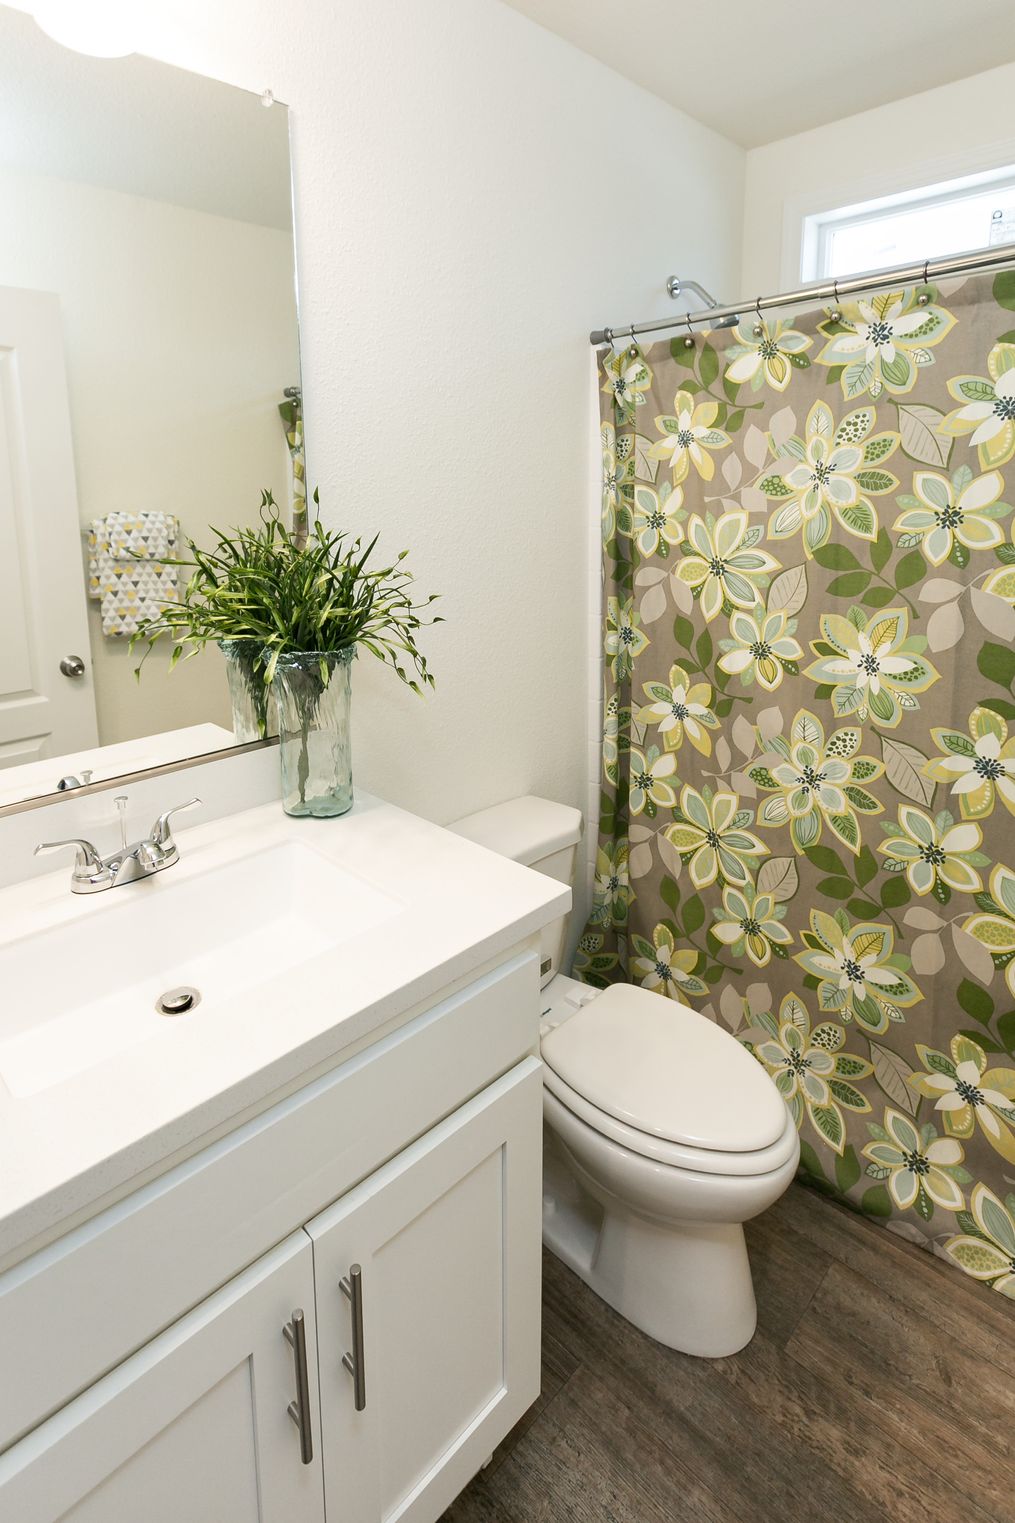 The FAIRPOINT 24322B Primary Bathroom. This Manufactured Mobile Home features 2 bedrooms and 1 bath.